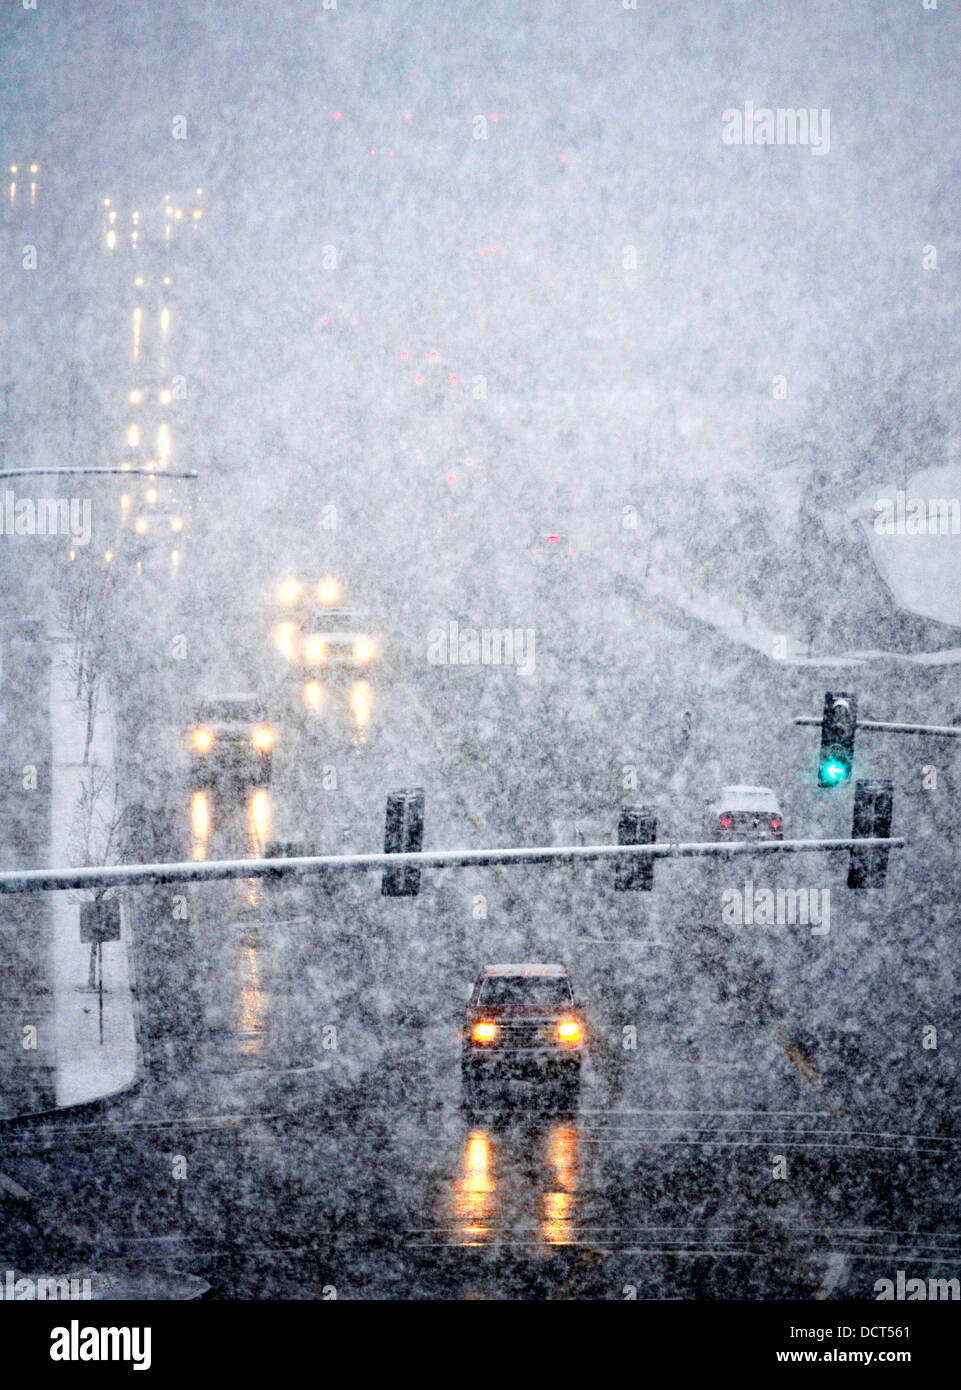 Snowy winter road with cars driving on roadway in snow storm Stock Photo